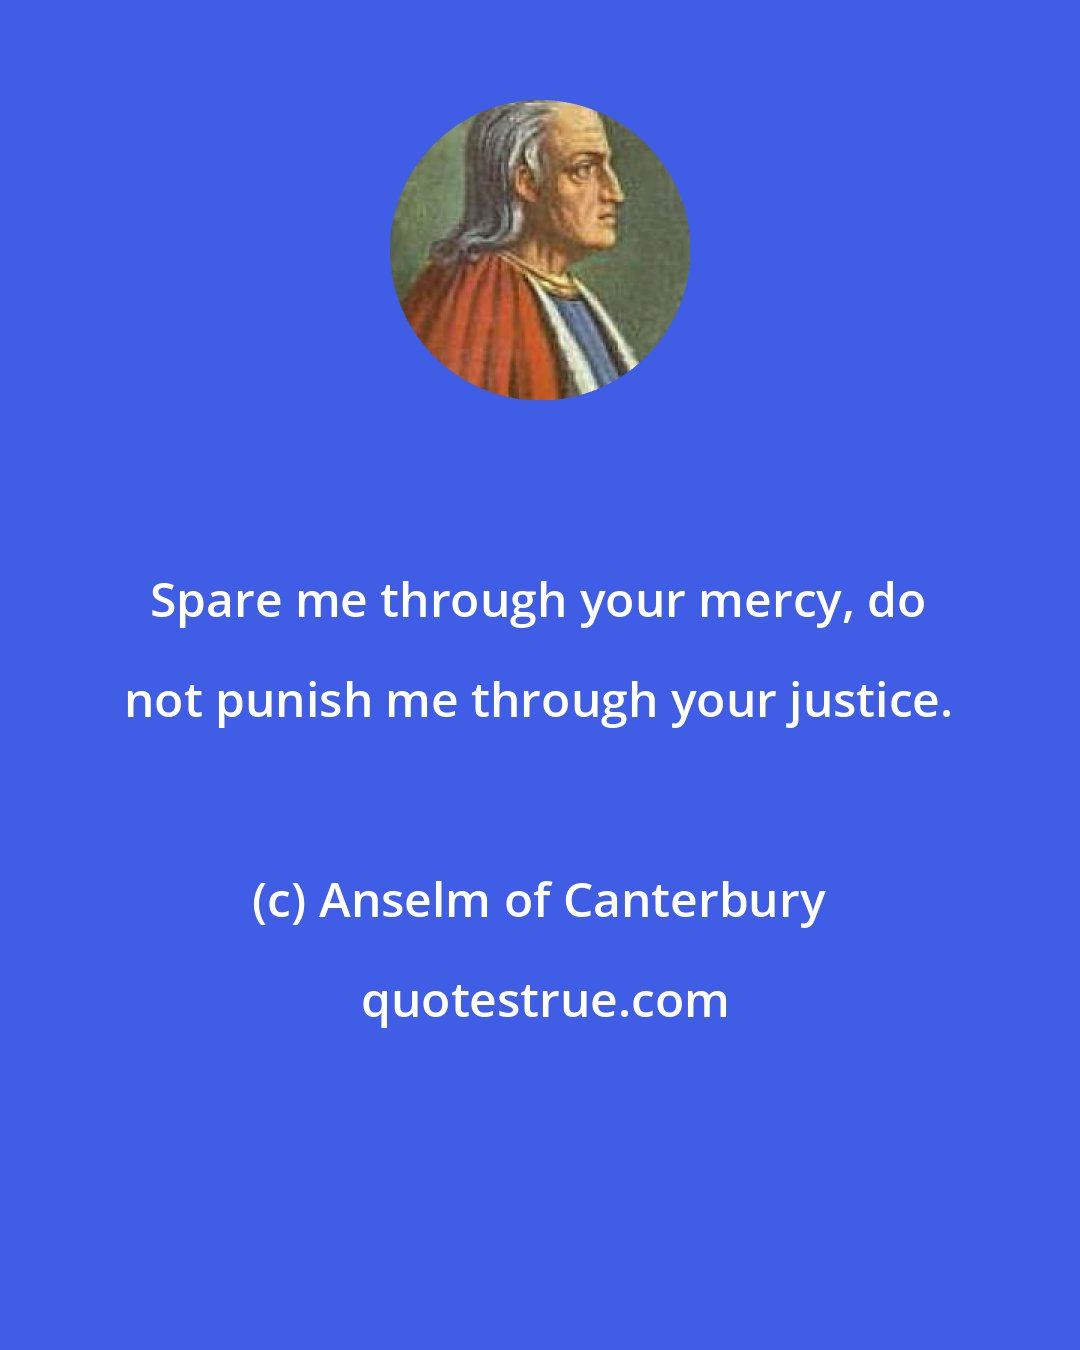 Anselm of Canterbury: Spare me through your mercy, do not punish me through your justice.